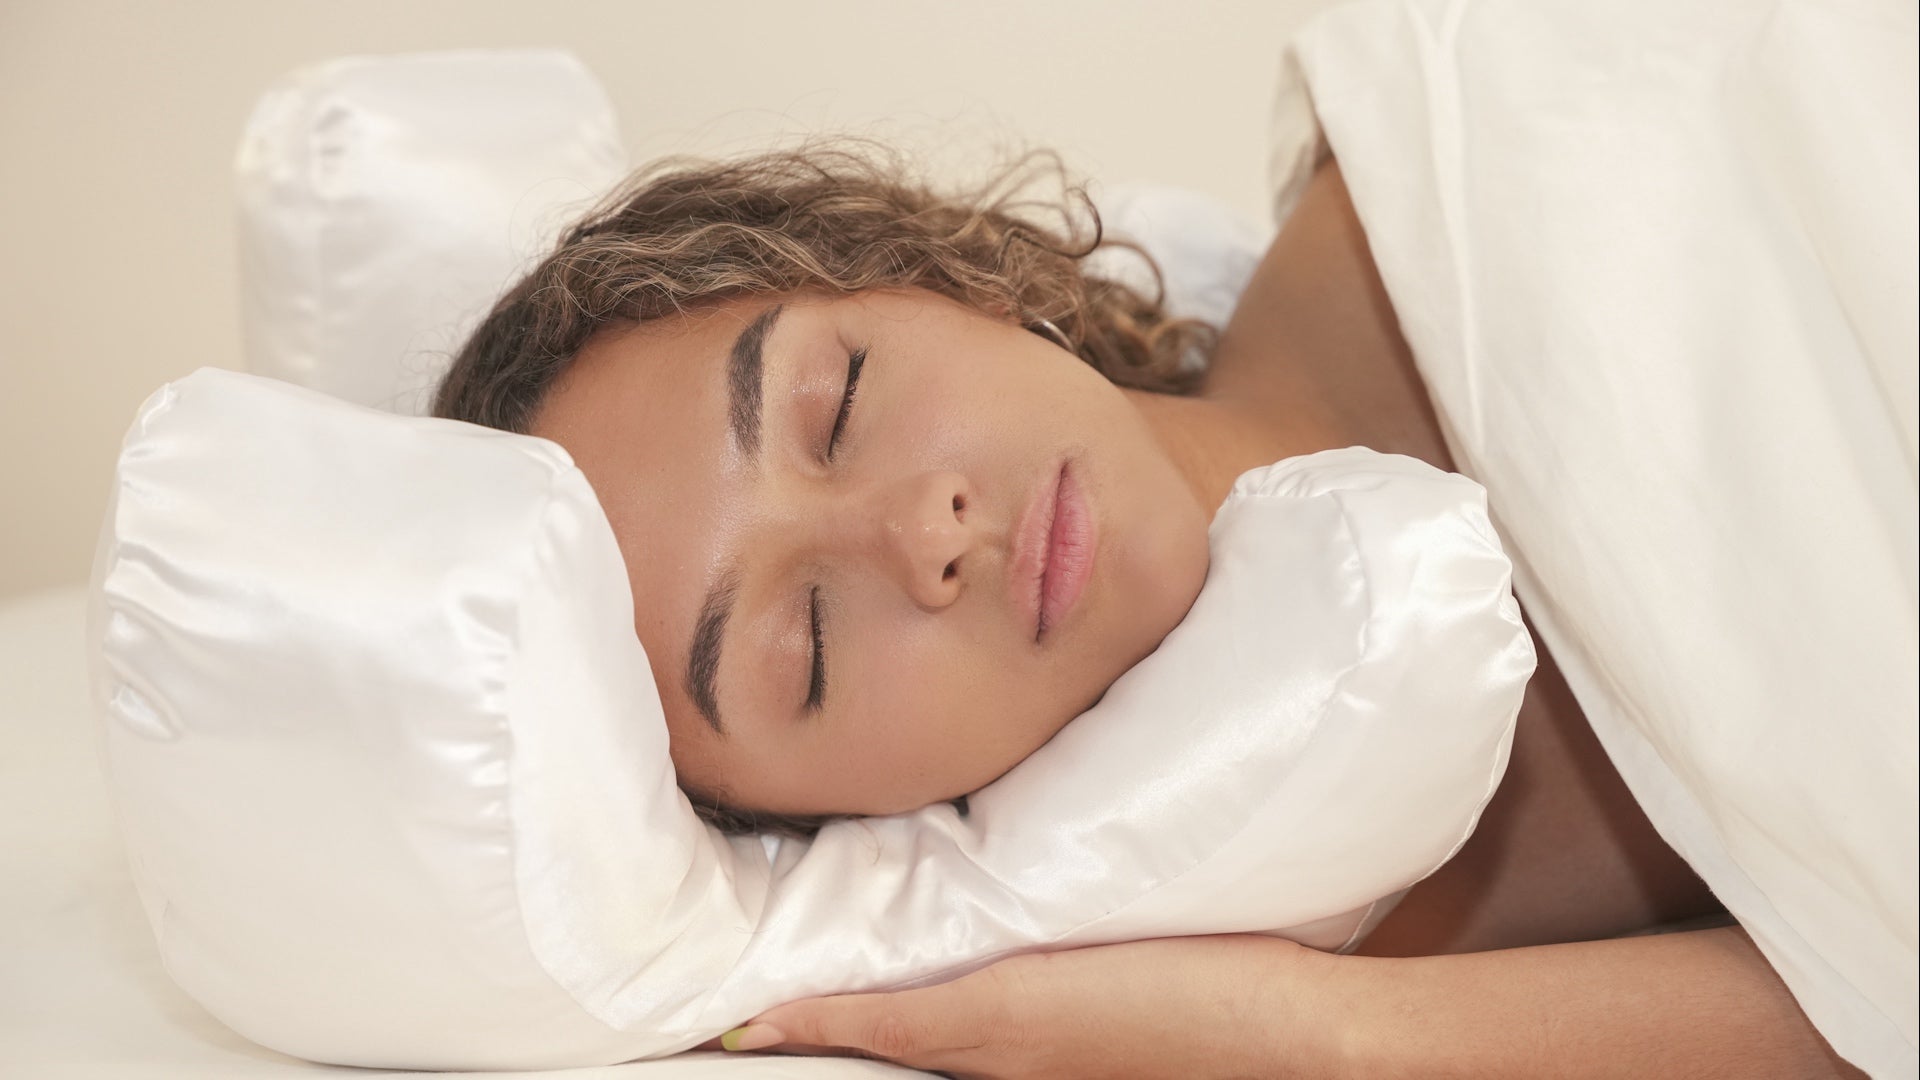 The Flawless Face Pillow Slated to Revolutionize the Anti-Wrinkle Industry